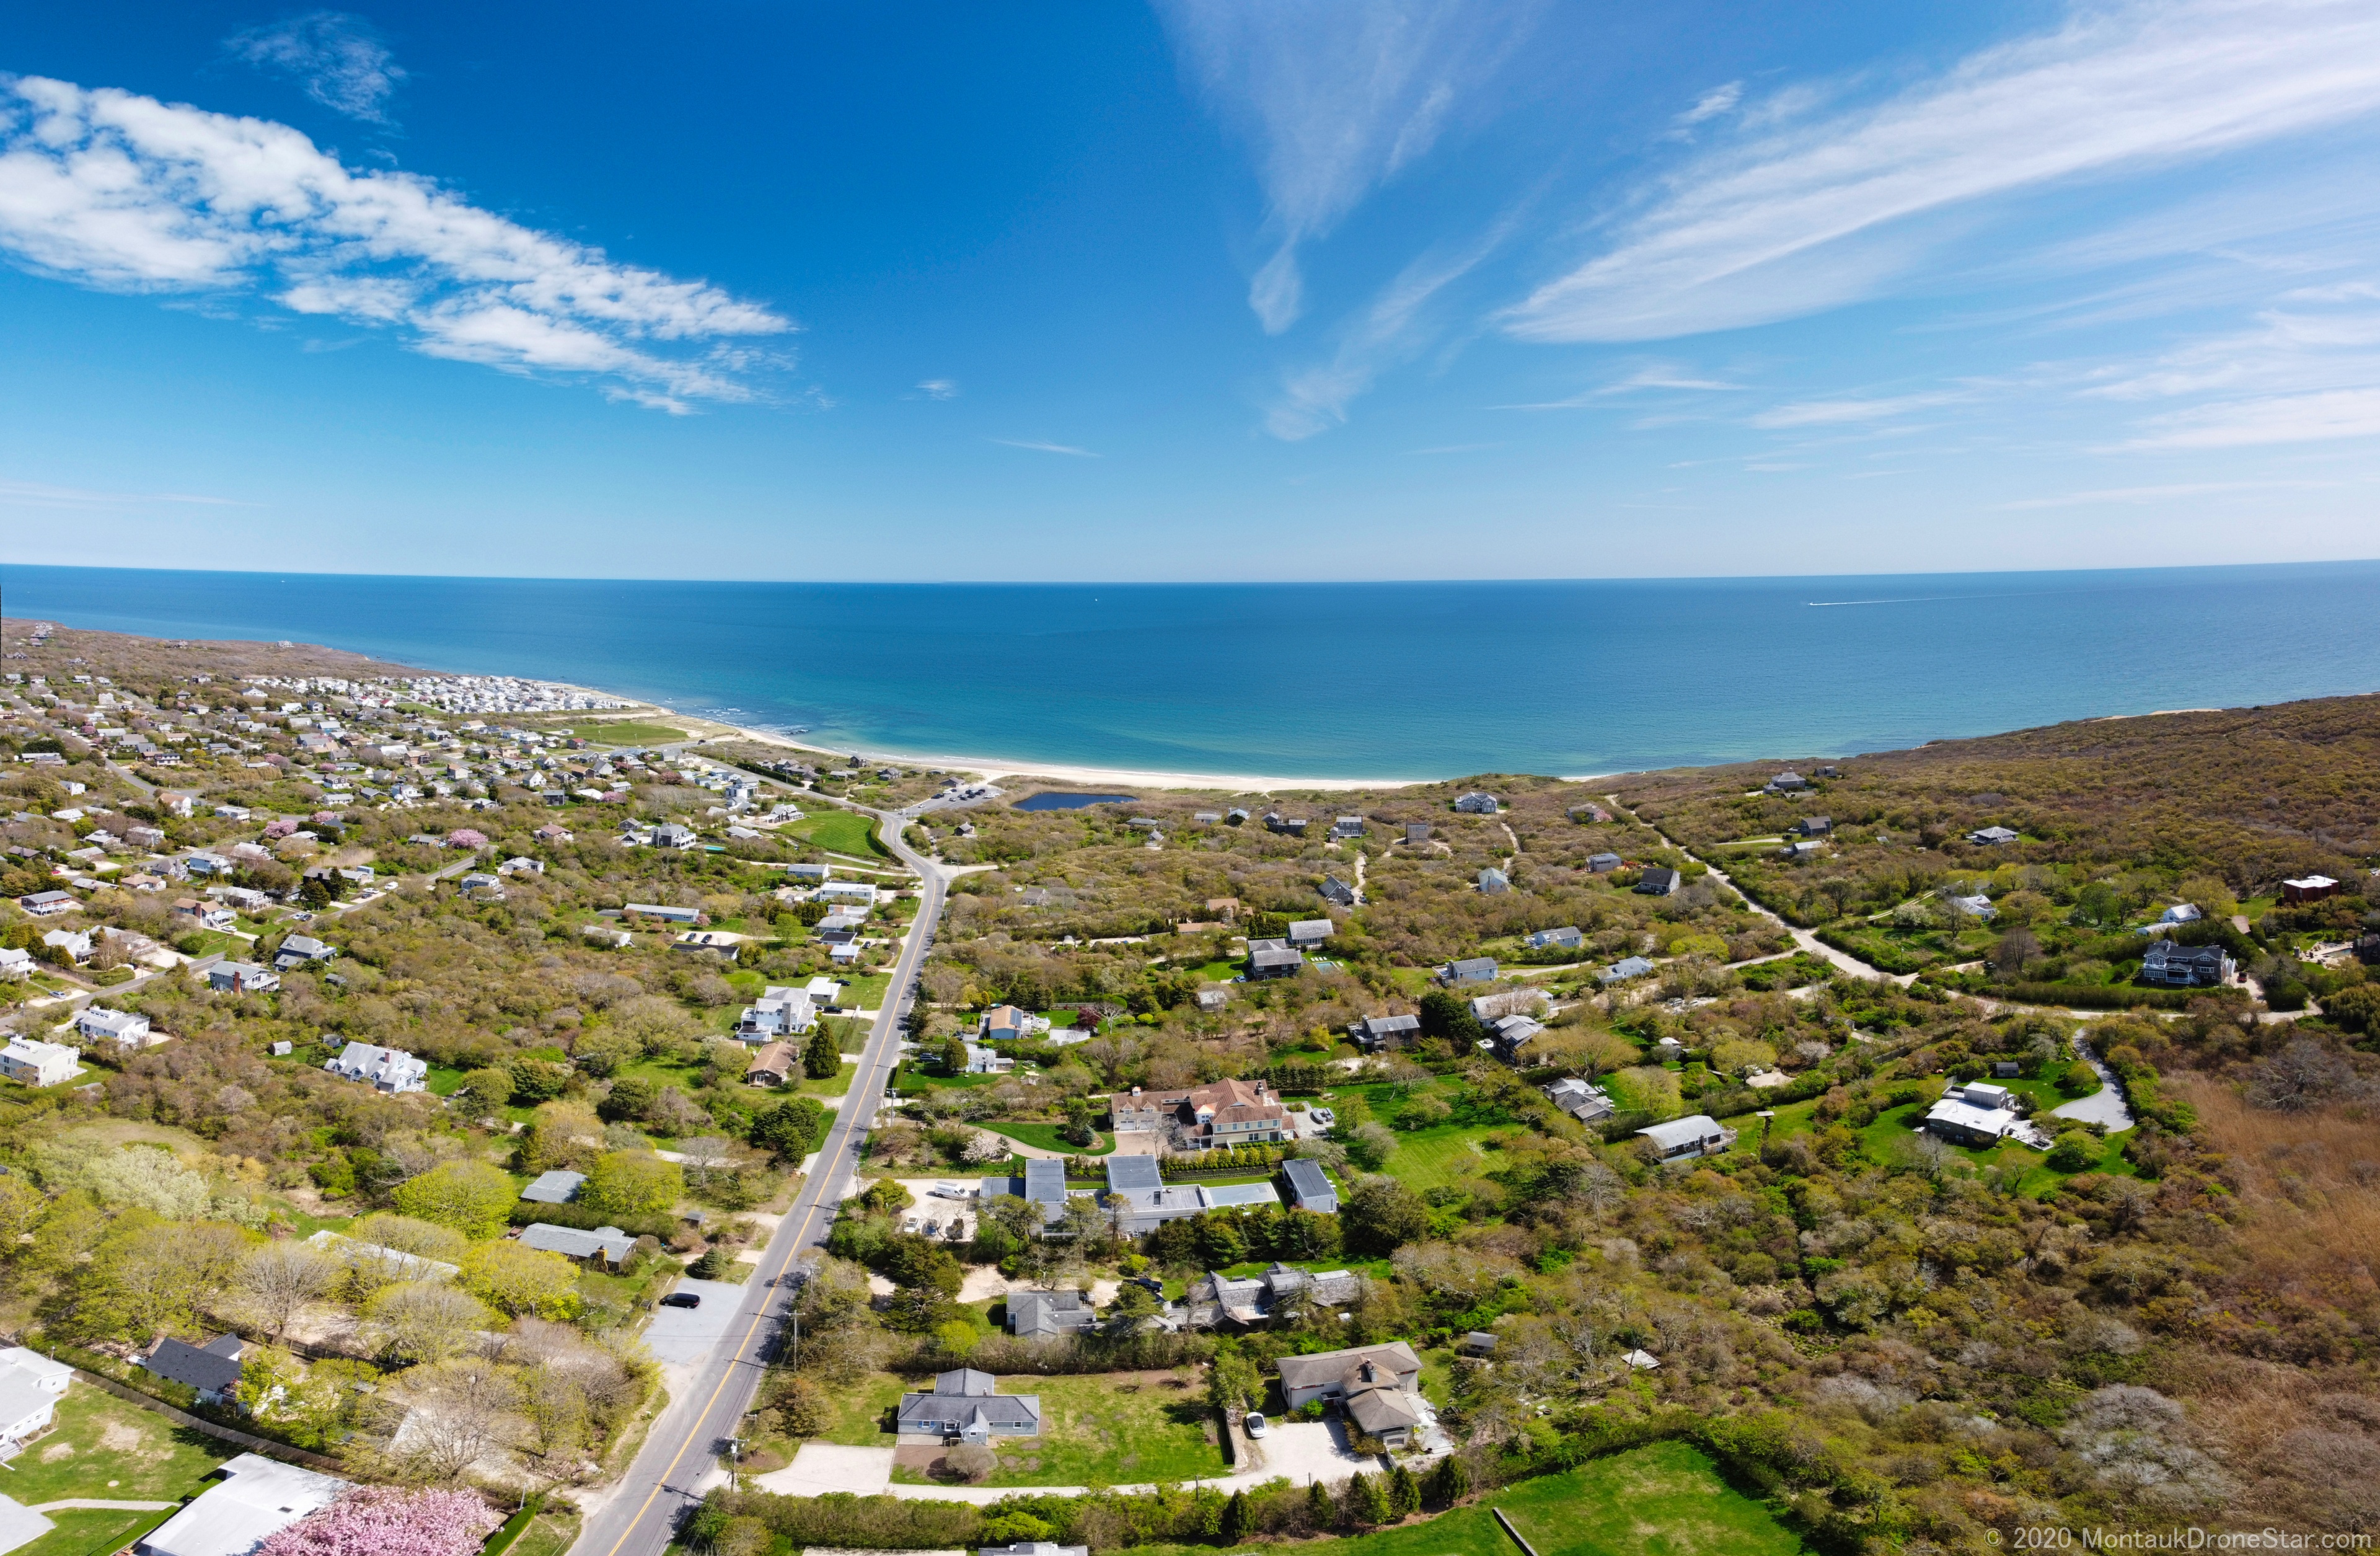 Drone photo of Ditch Plains in Montauk, NY